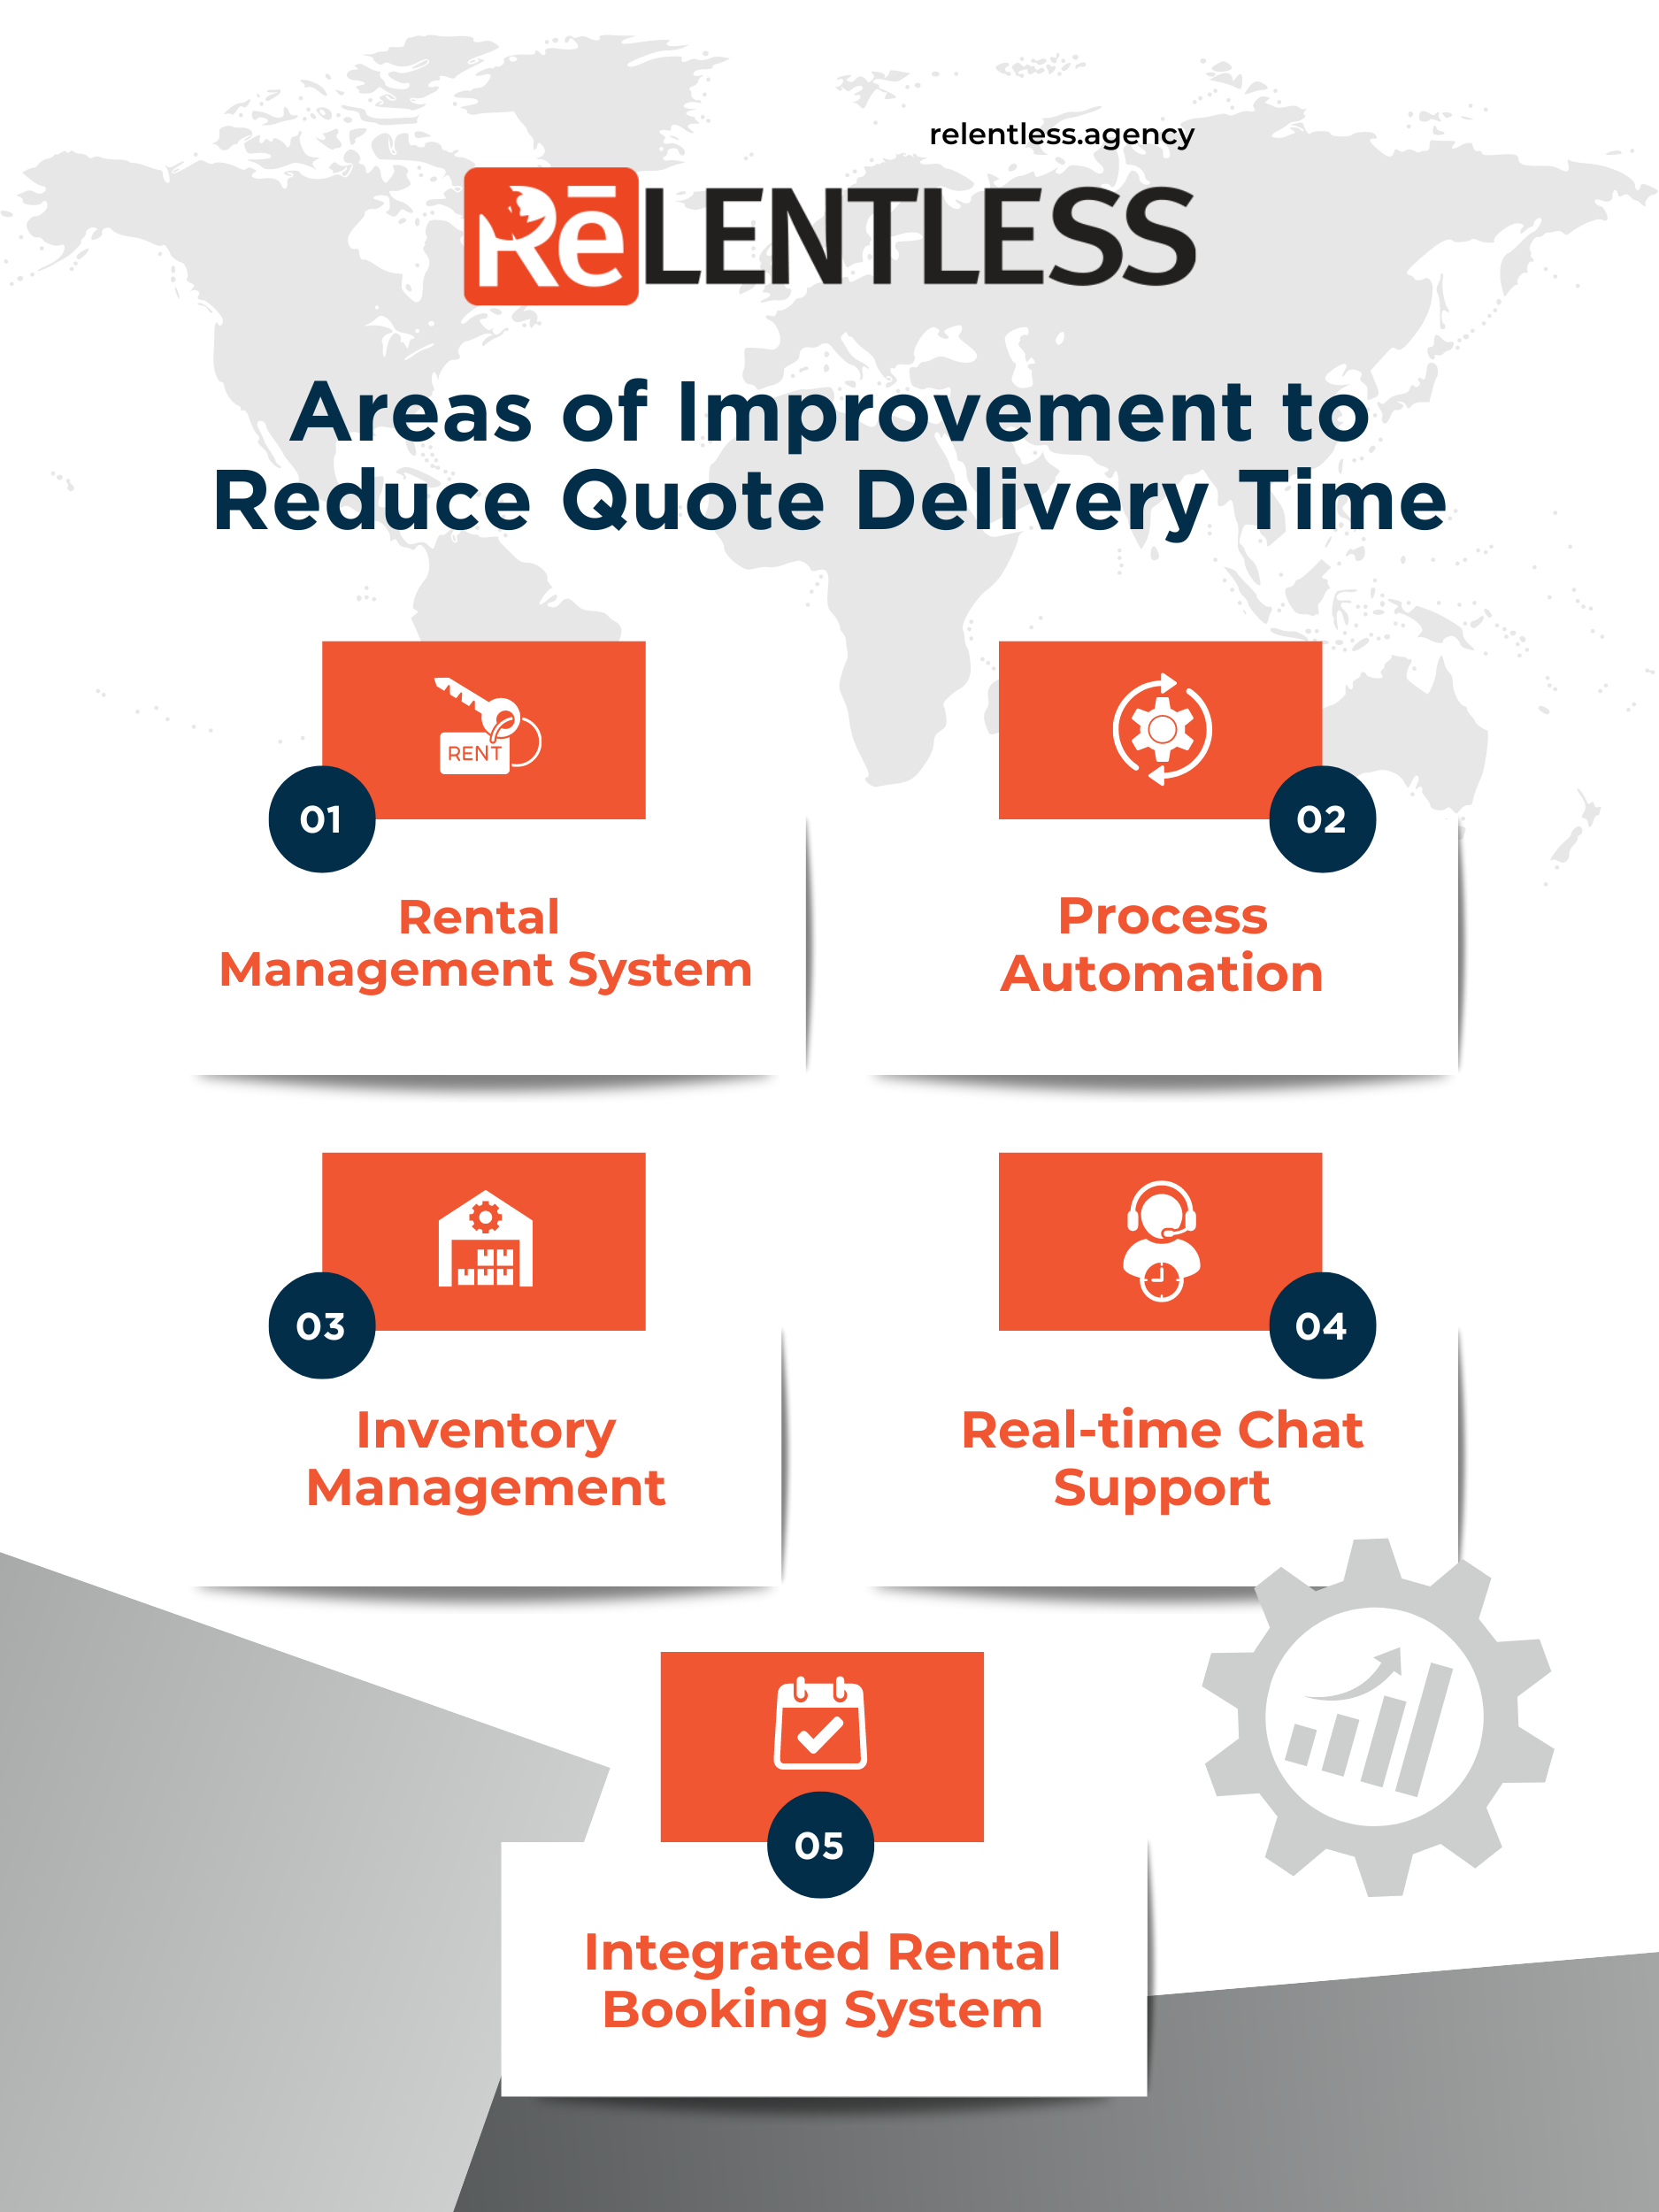 How to Reduce Quote Delivery Time for Your Equipment Rental Business - Areas of Improvement